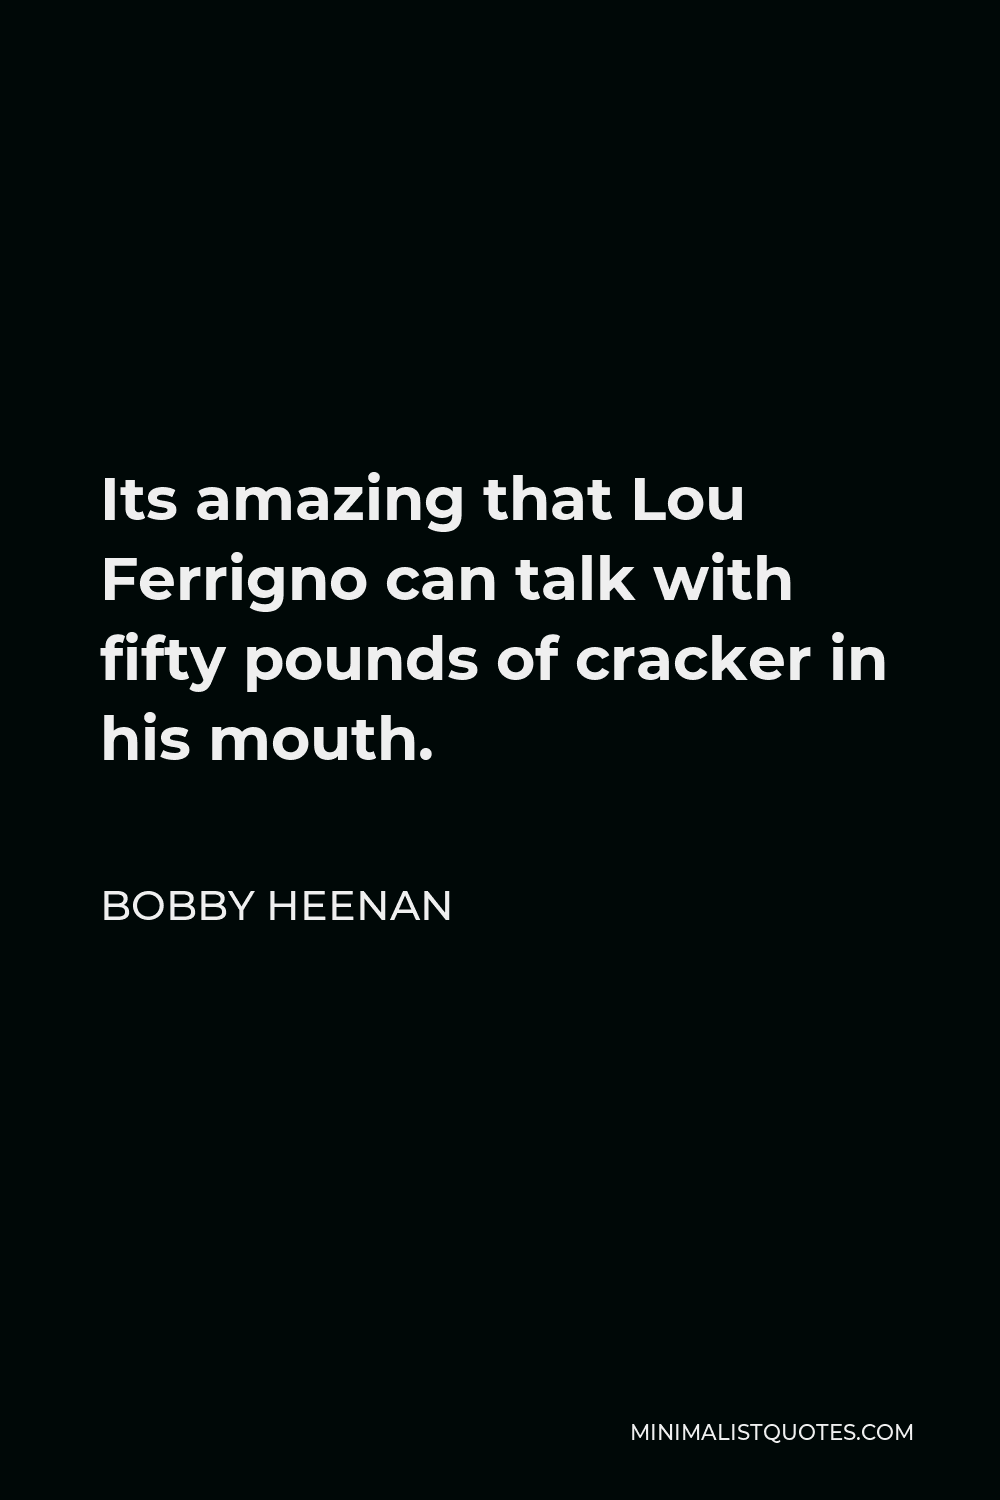 Bobby Heenan Quote - Its amazing that Lou Ferrigno can talk with fifty pounds of cracker in his mouth.